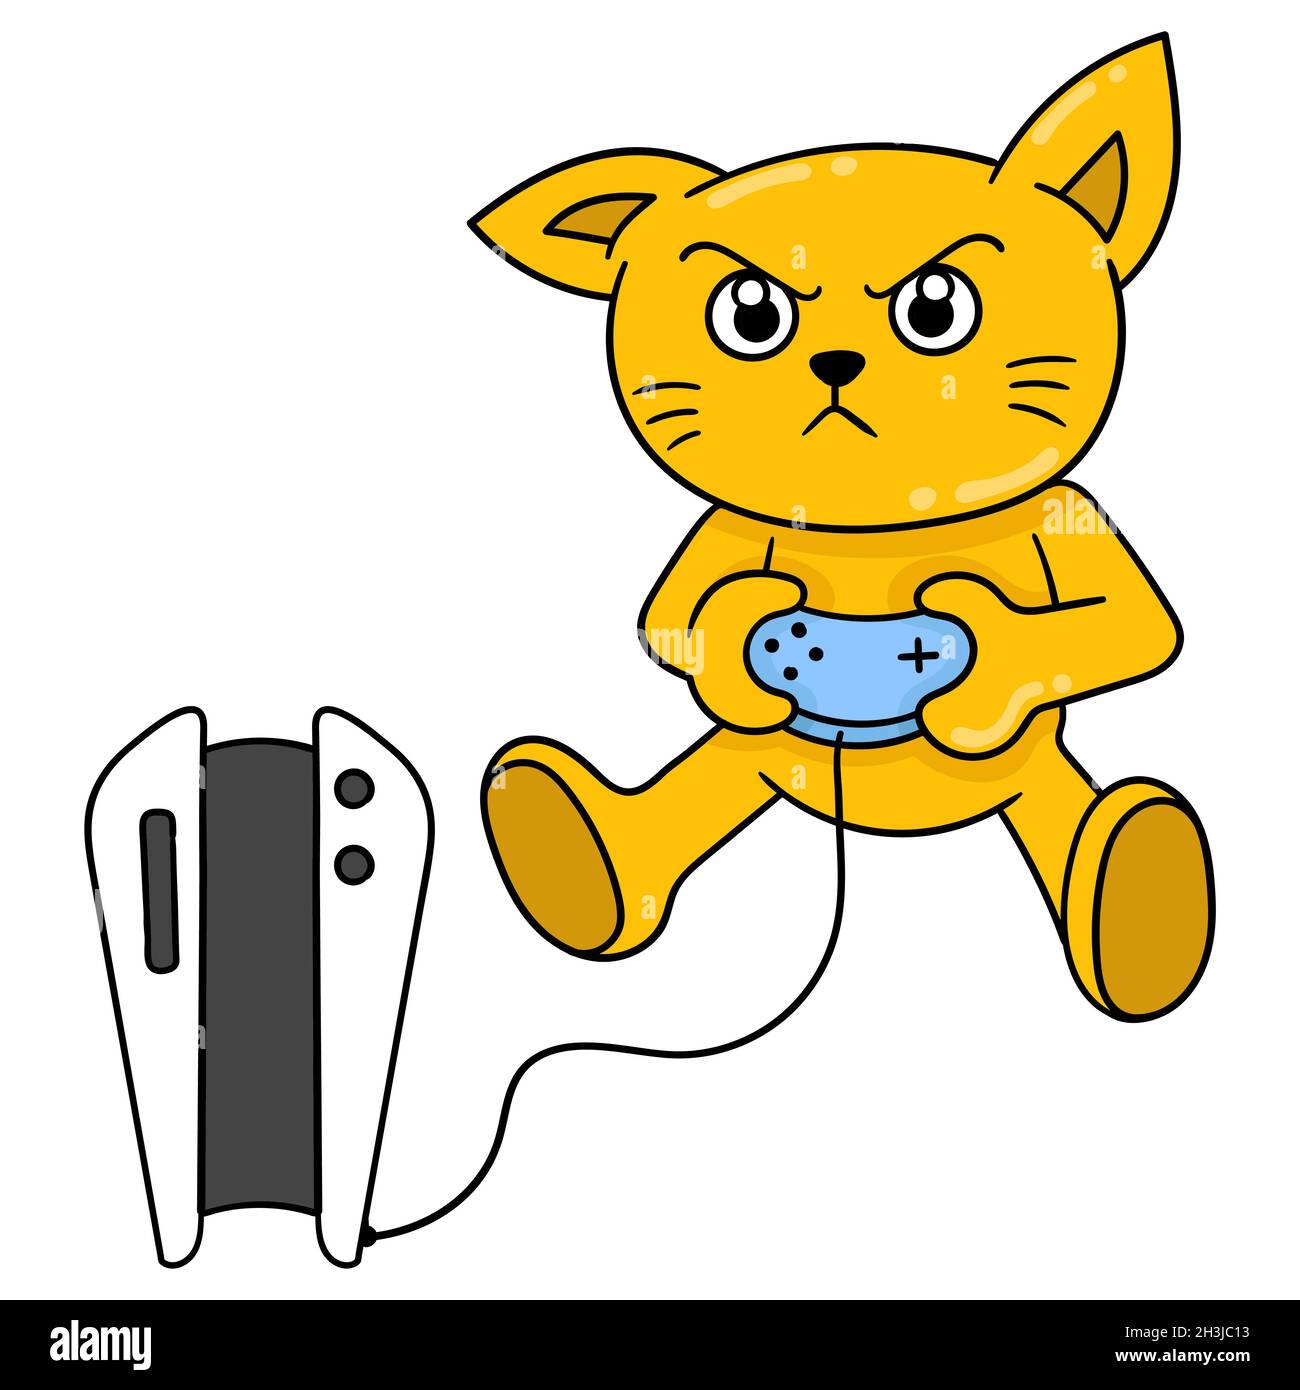 cats are having a hobby of playing Playstation games Stock Vector